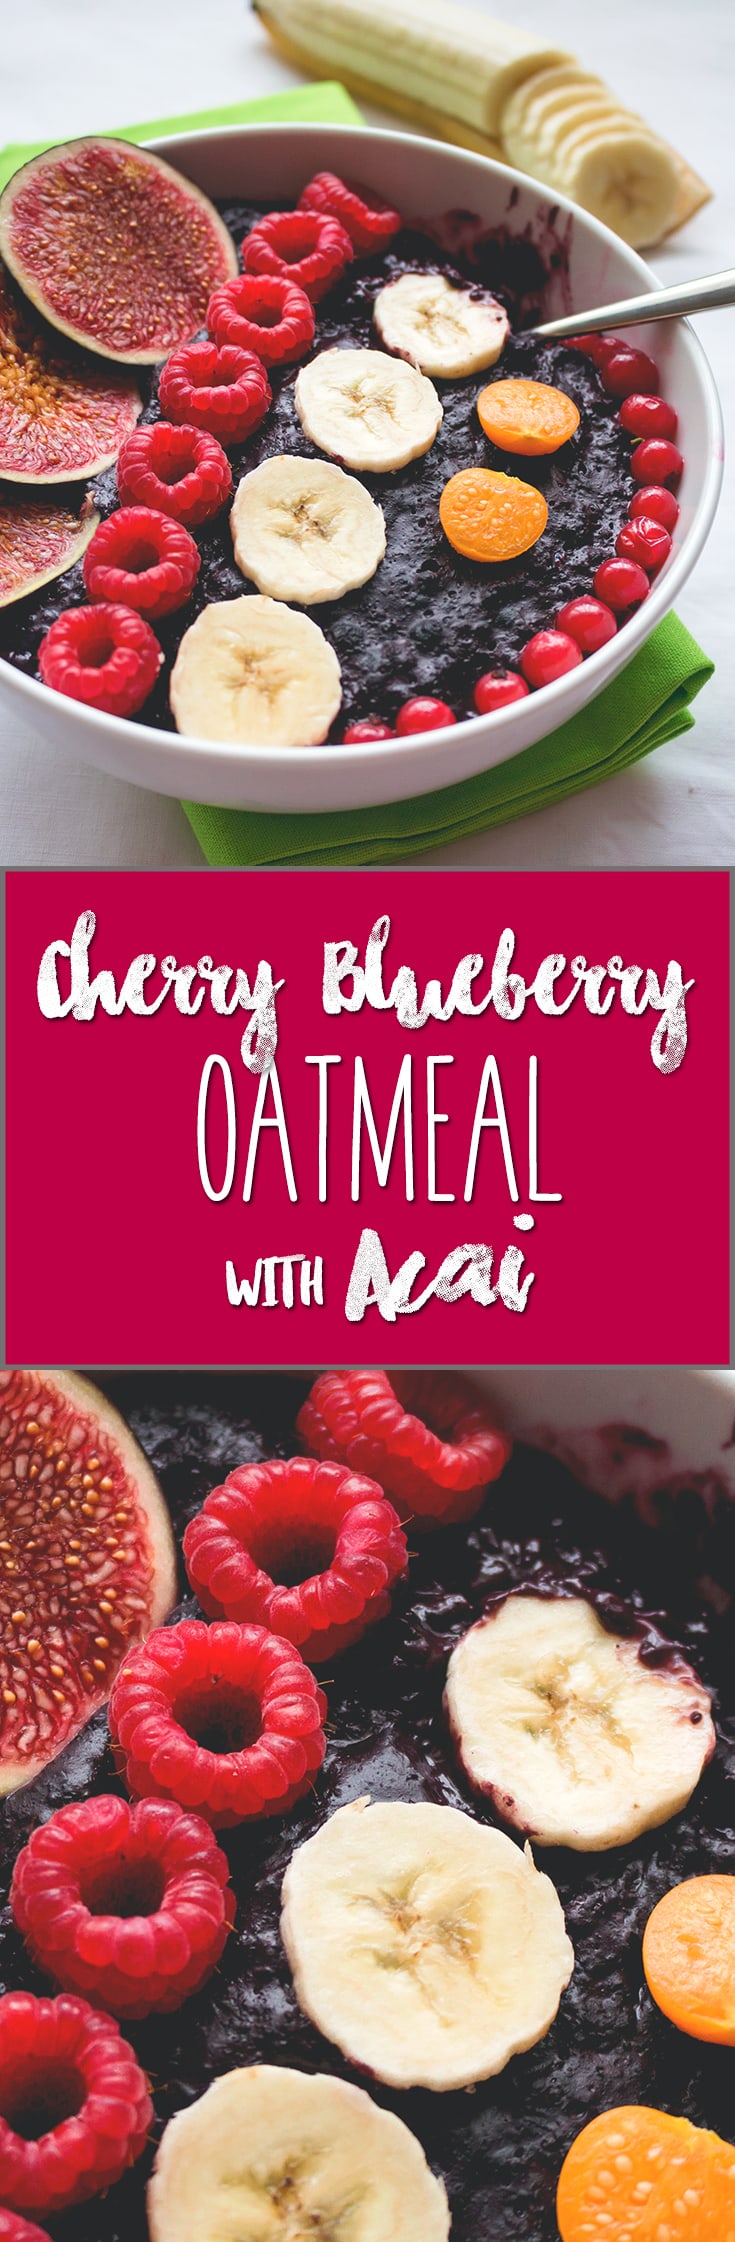 Cherry Blueberry Oatmeal with Acai - blueberries, cherries, and acai create such a delicious combination, you won't believe you aren't eating a dessert! Vegan and gluten free recipe. | thehealthfulideas.com